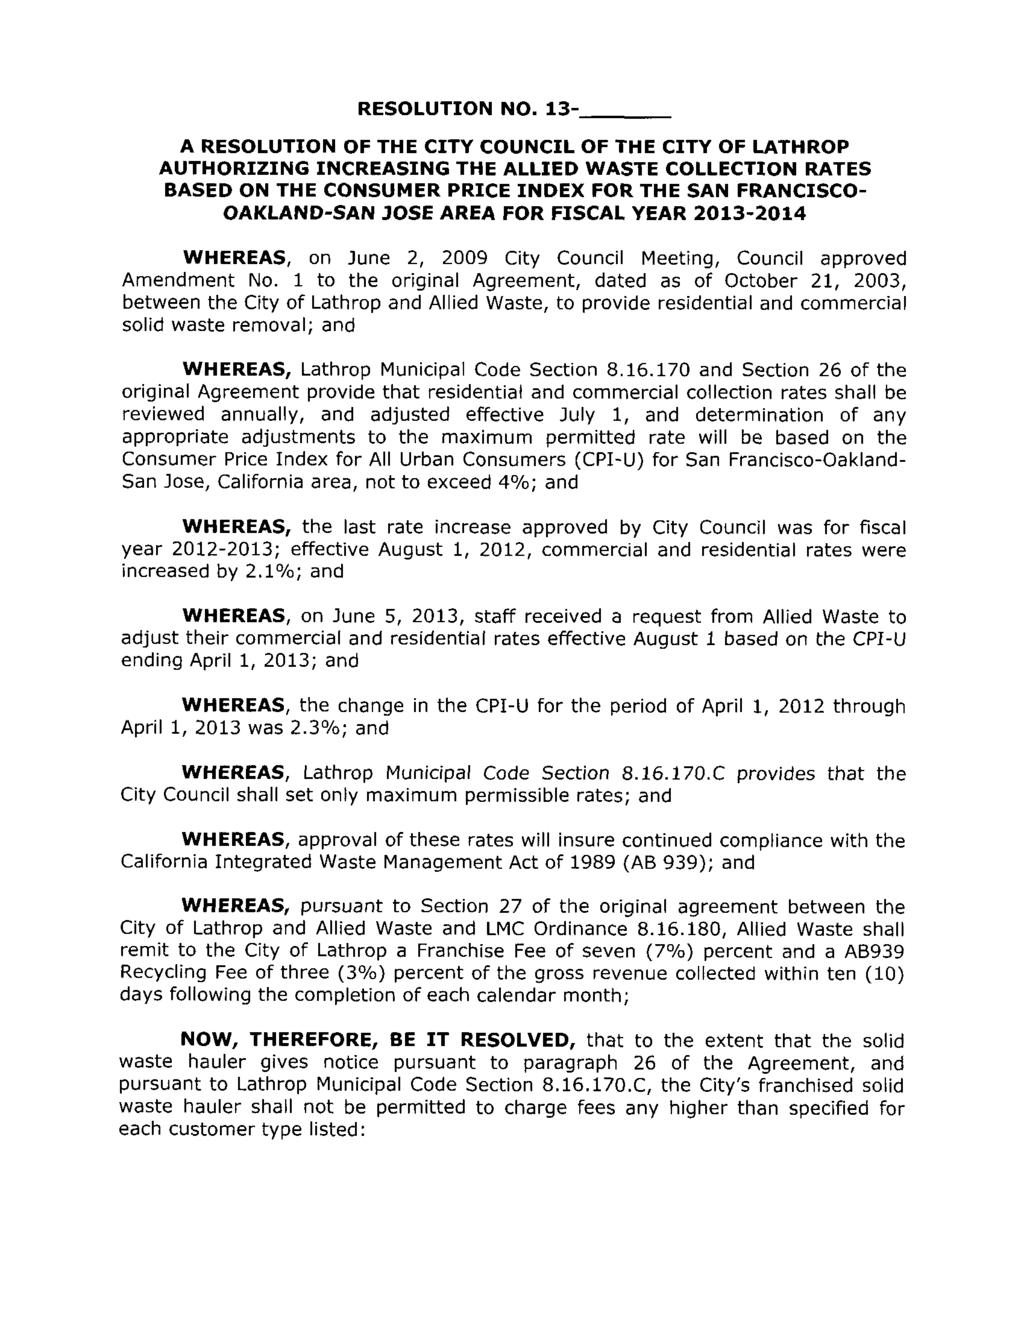 RESOLUTION NO 13 A RESOLUTION OF THE CITY COUNCIL OF THE CITY OF LATHROP AUTHORIZIIVG INCREASING THE ALLIED WASTE COLLECTION RATES BASED ON THE CONSUMER PRICE INDEX FOR THE SAN FRANCISCO OAKLAND SAN